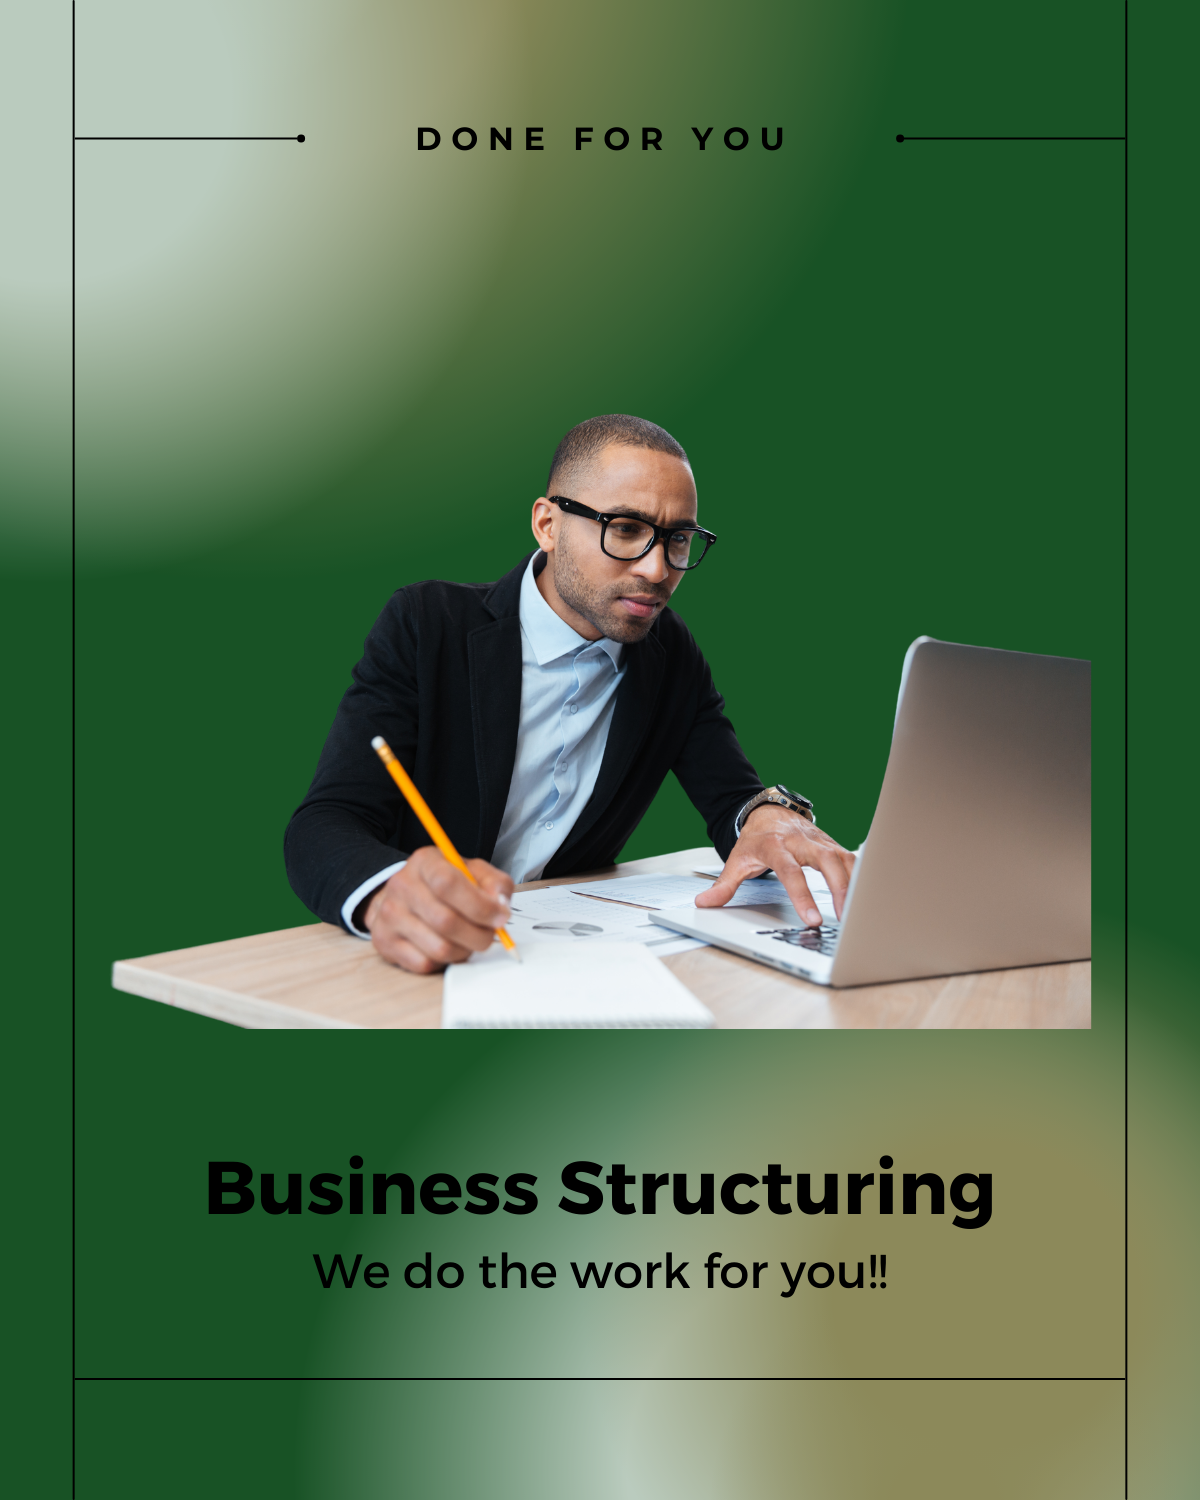 DFY (Done for you) Business Structuring